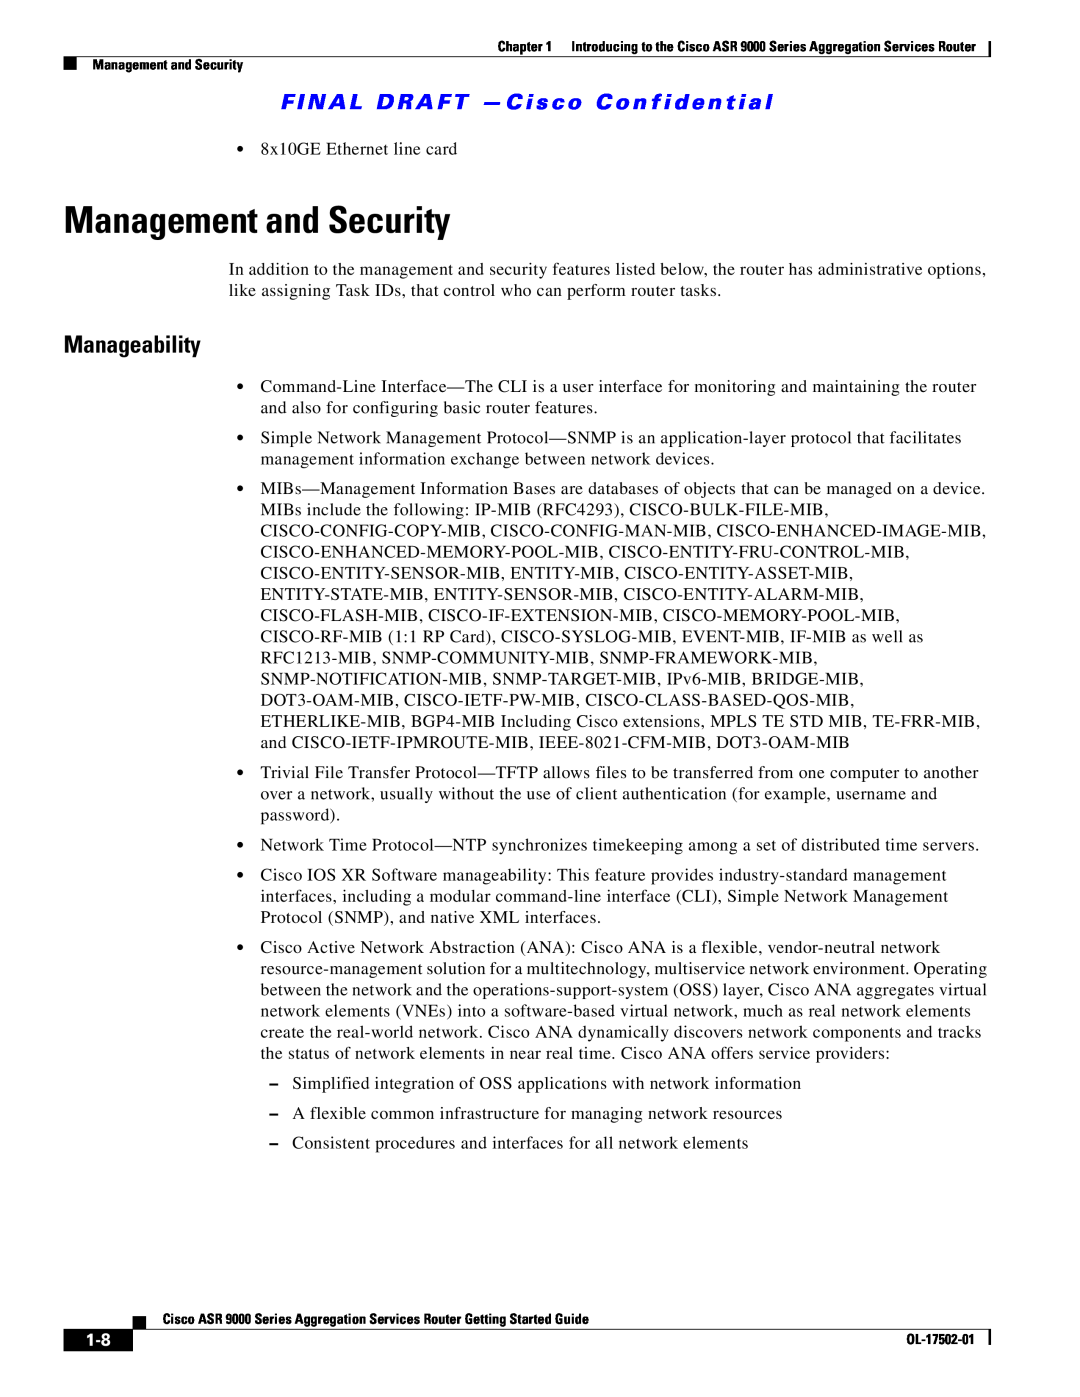 Cisco Systems A9K24X10GETR Management and Security, Manageability, F I N A L D R A F T - C i s c o C o n f i d e n t i a l 